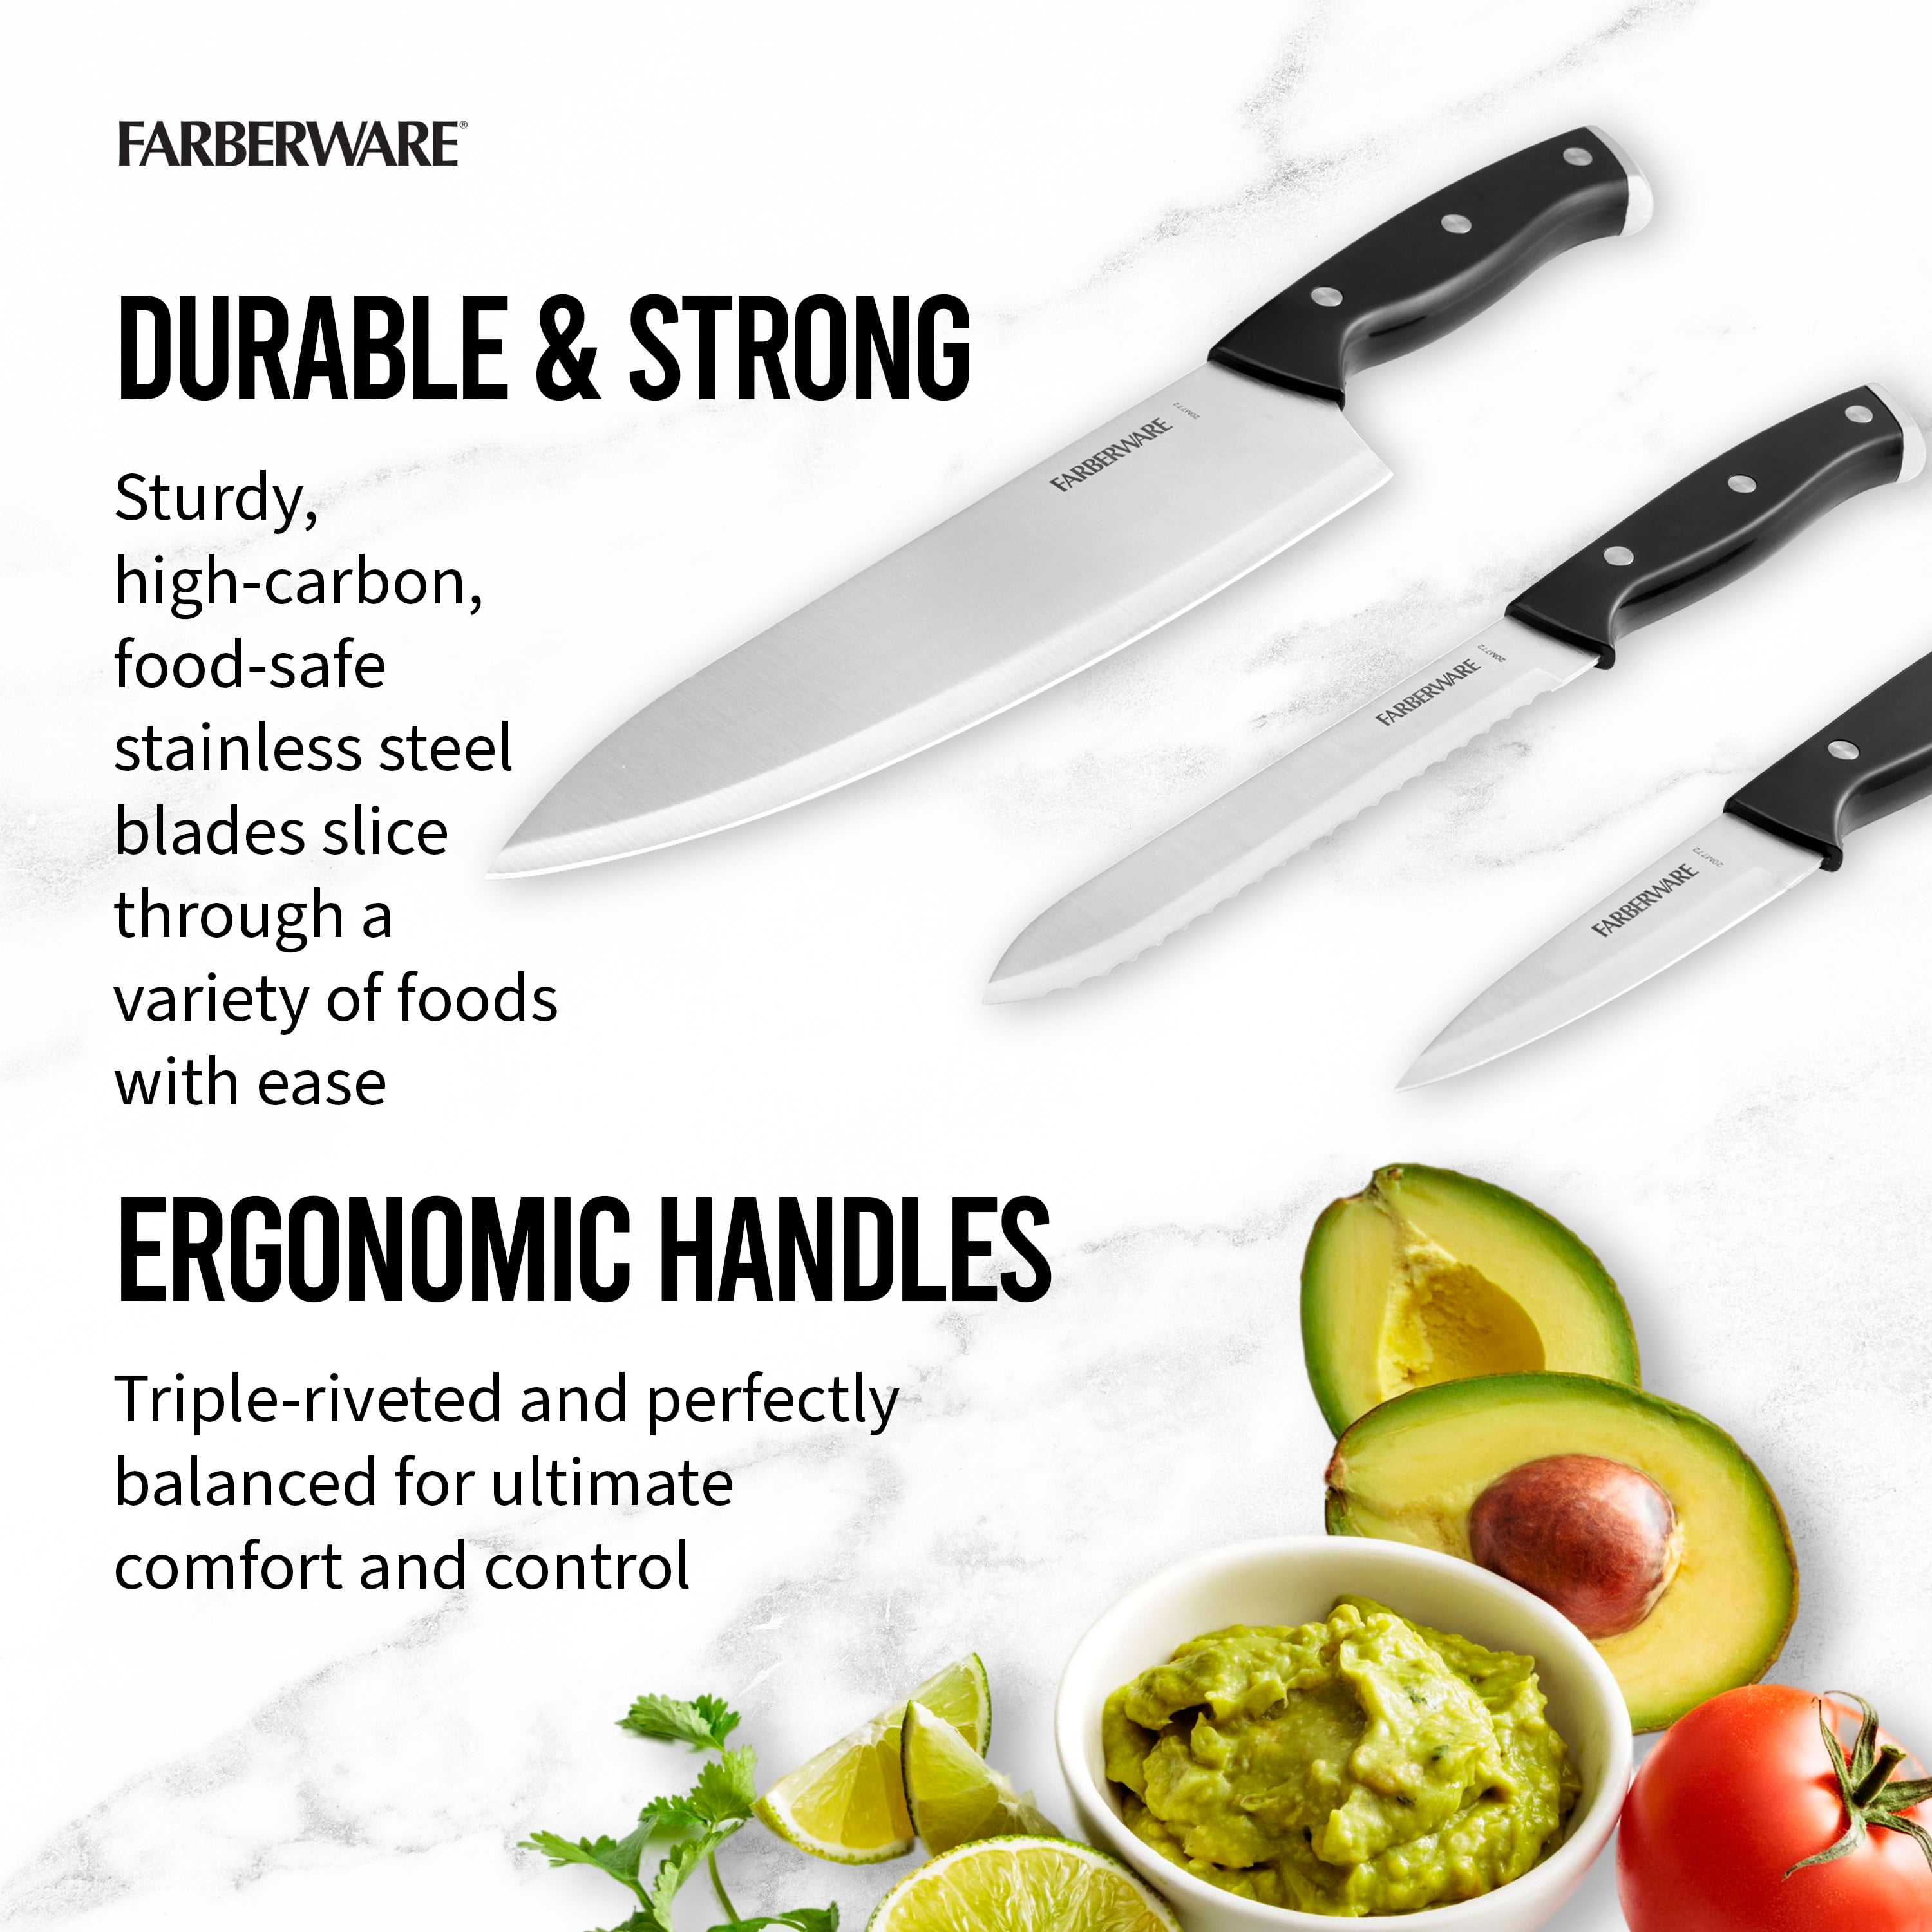 Farberware Classic Stainless Steel 6 Piece Full Tang Tripe-Riveted Knife  Prep Set with Black Handles 